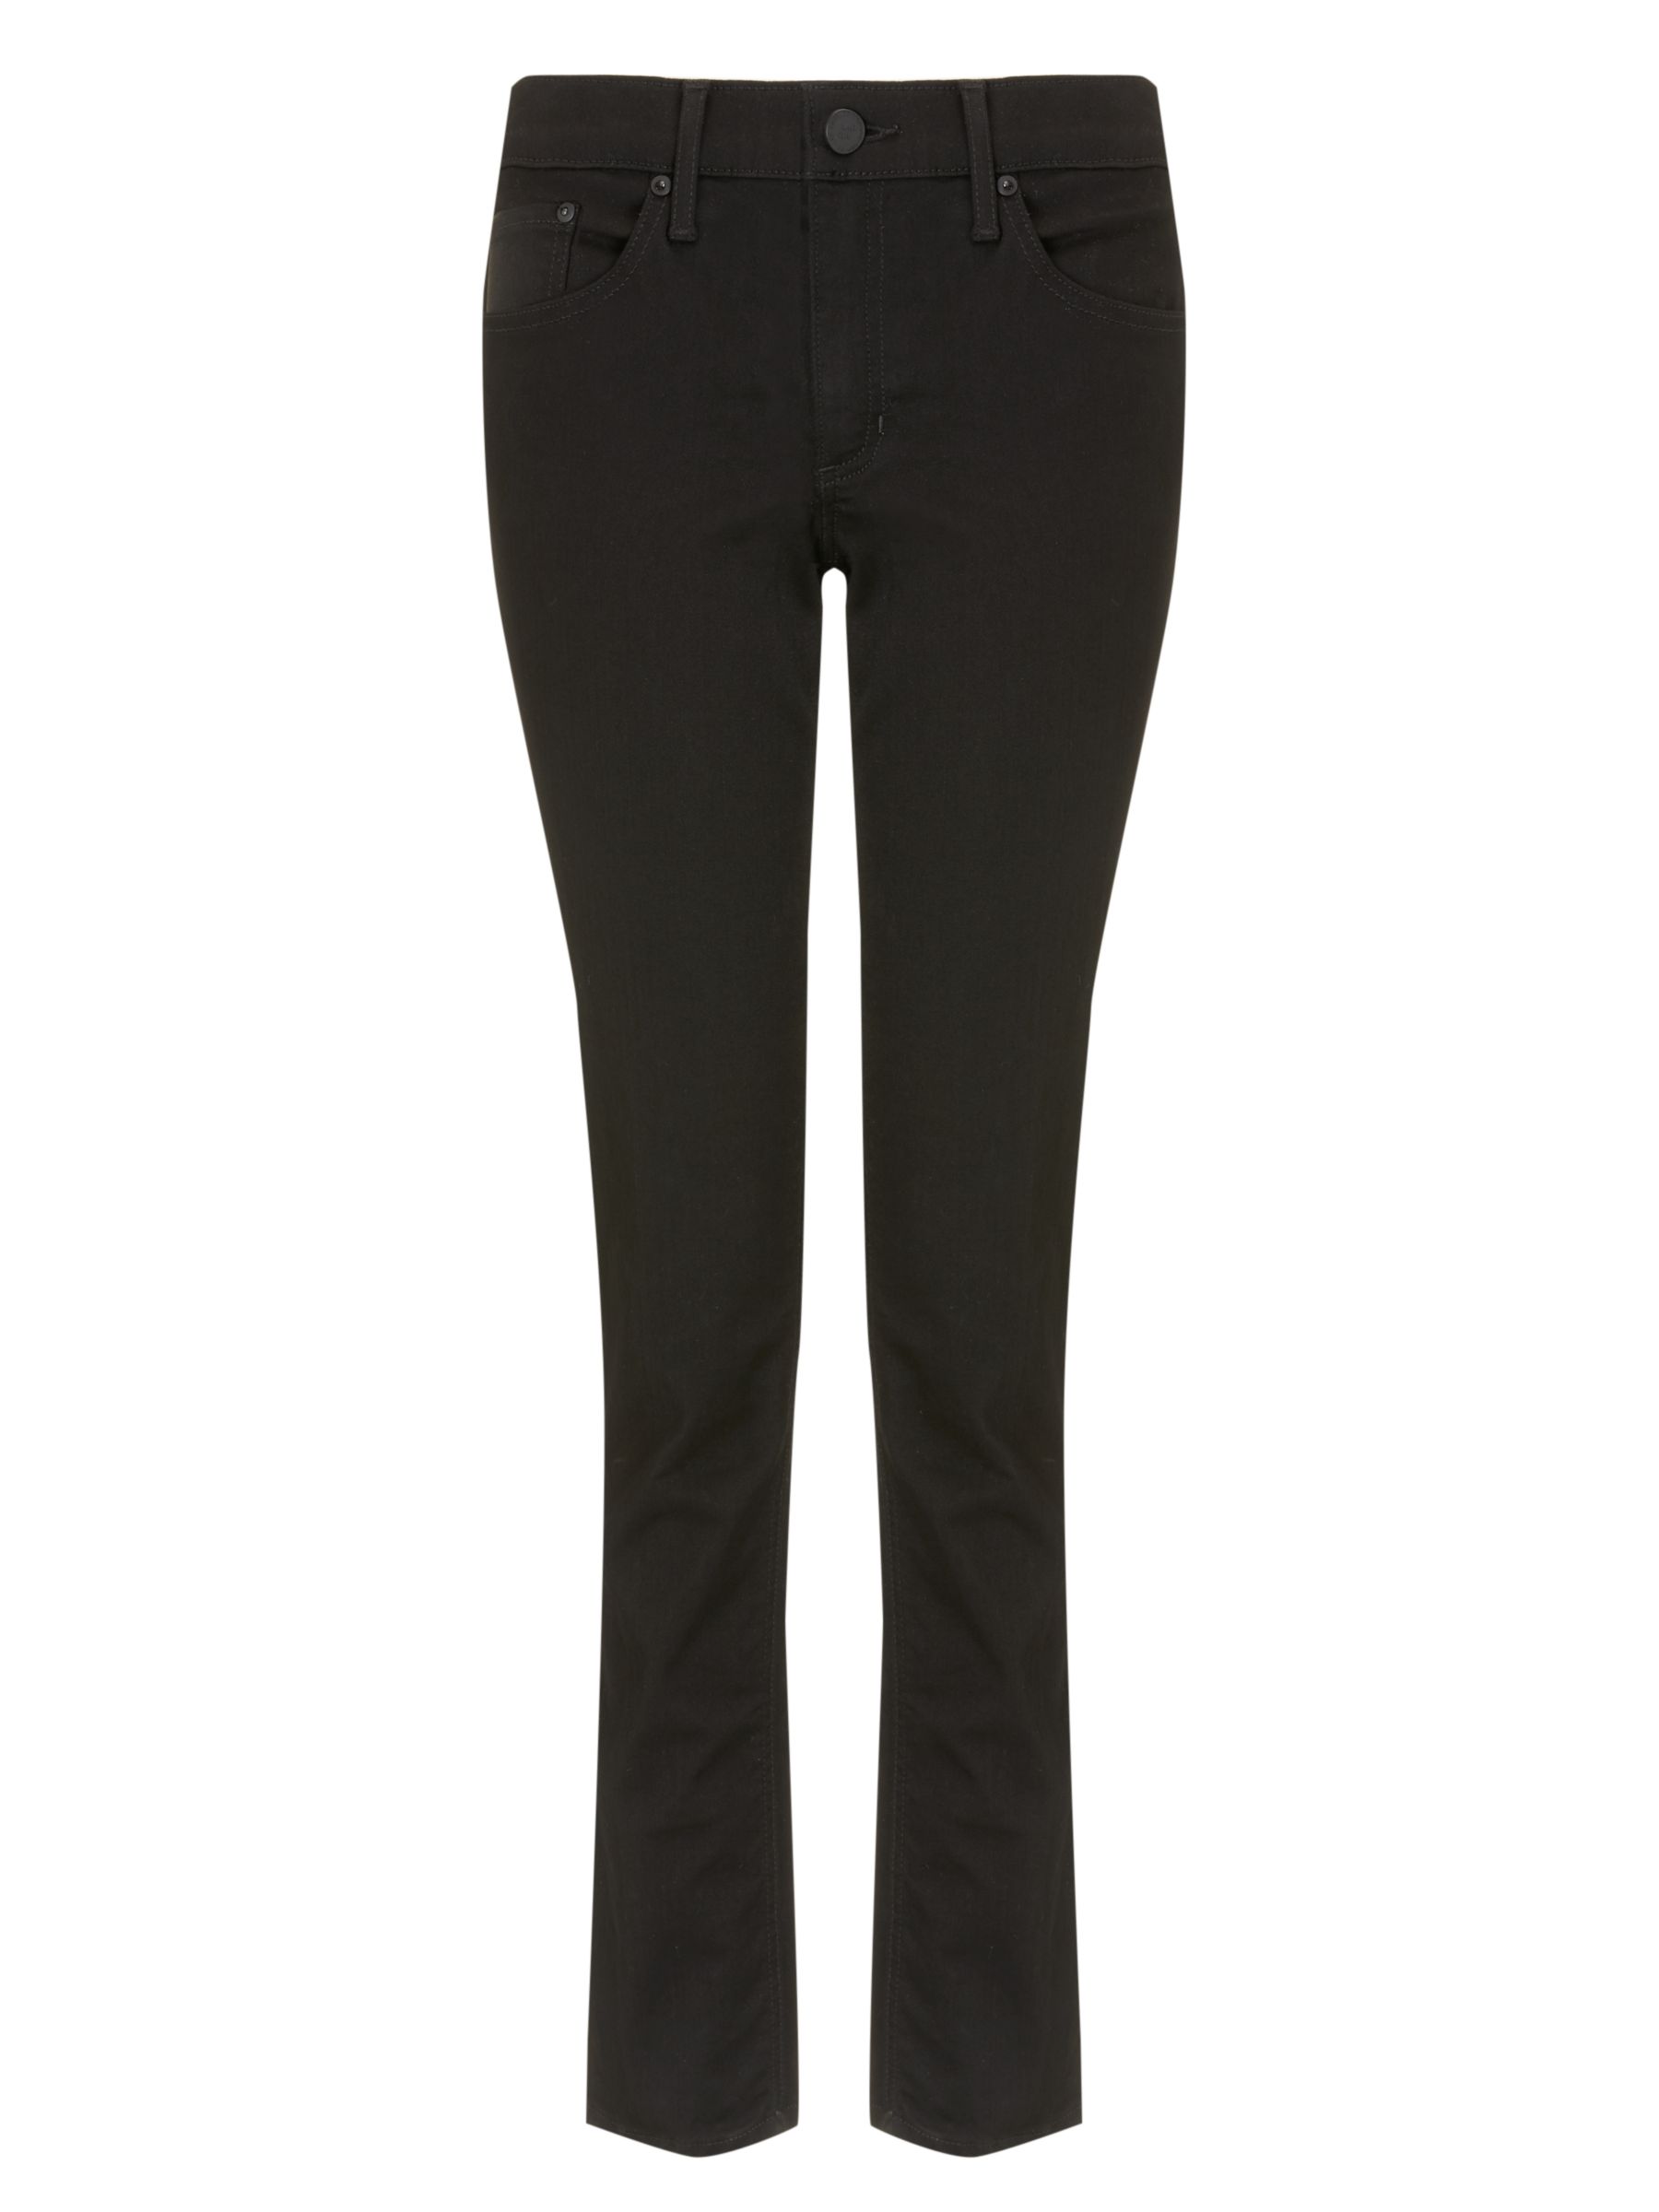 AND/OR Silverlake Straight Leg Jeans, Black